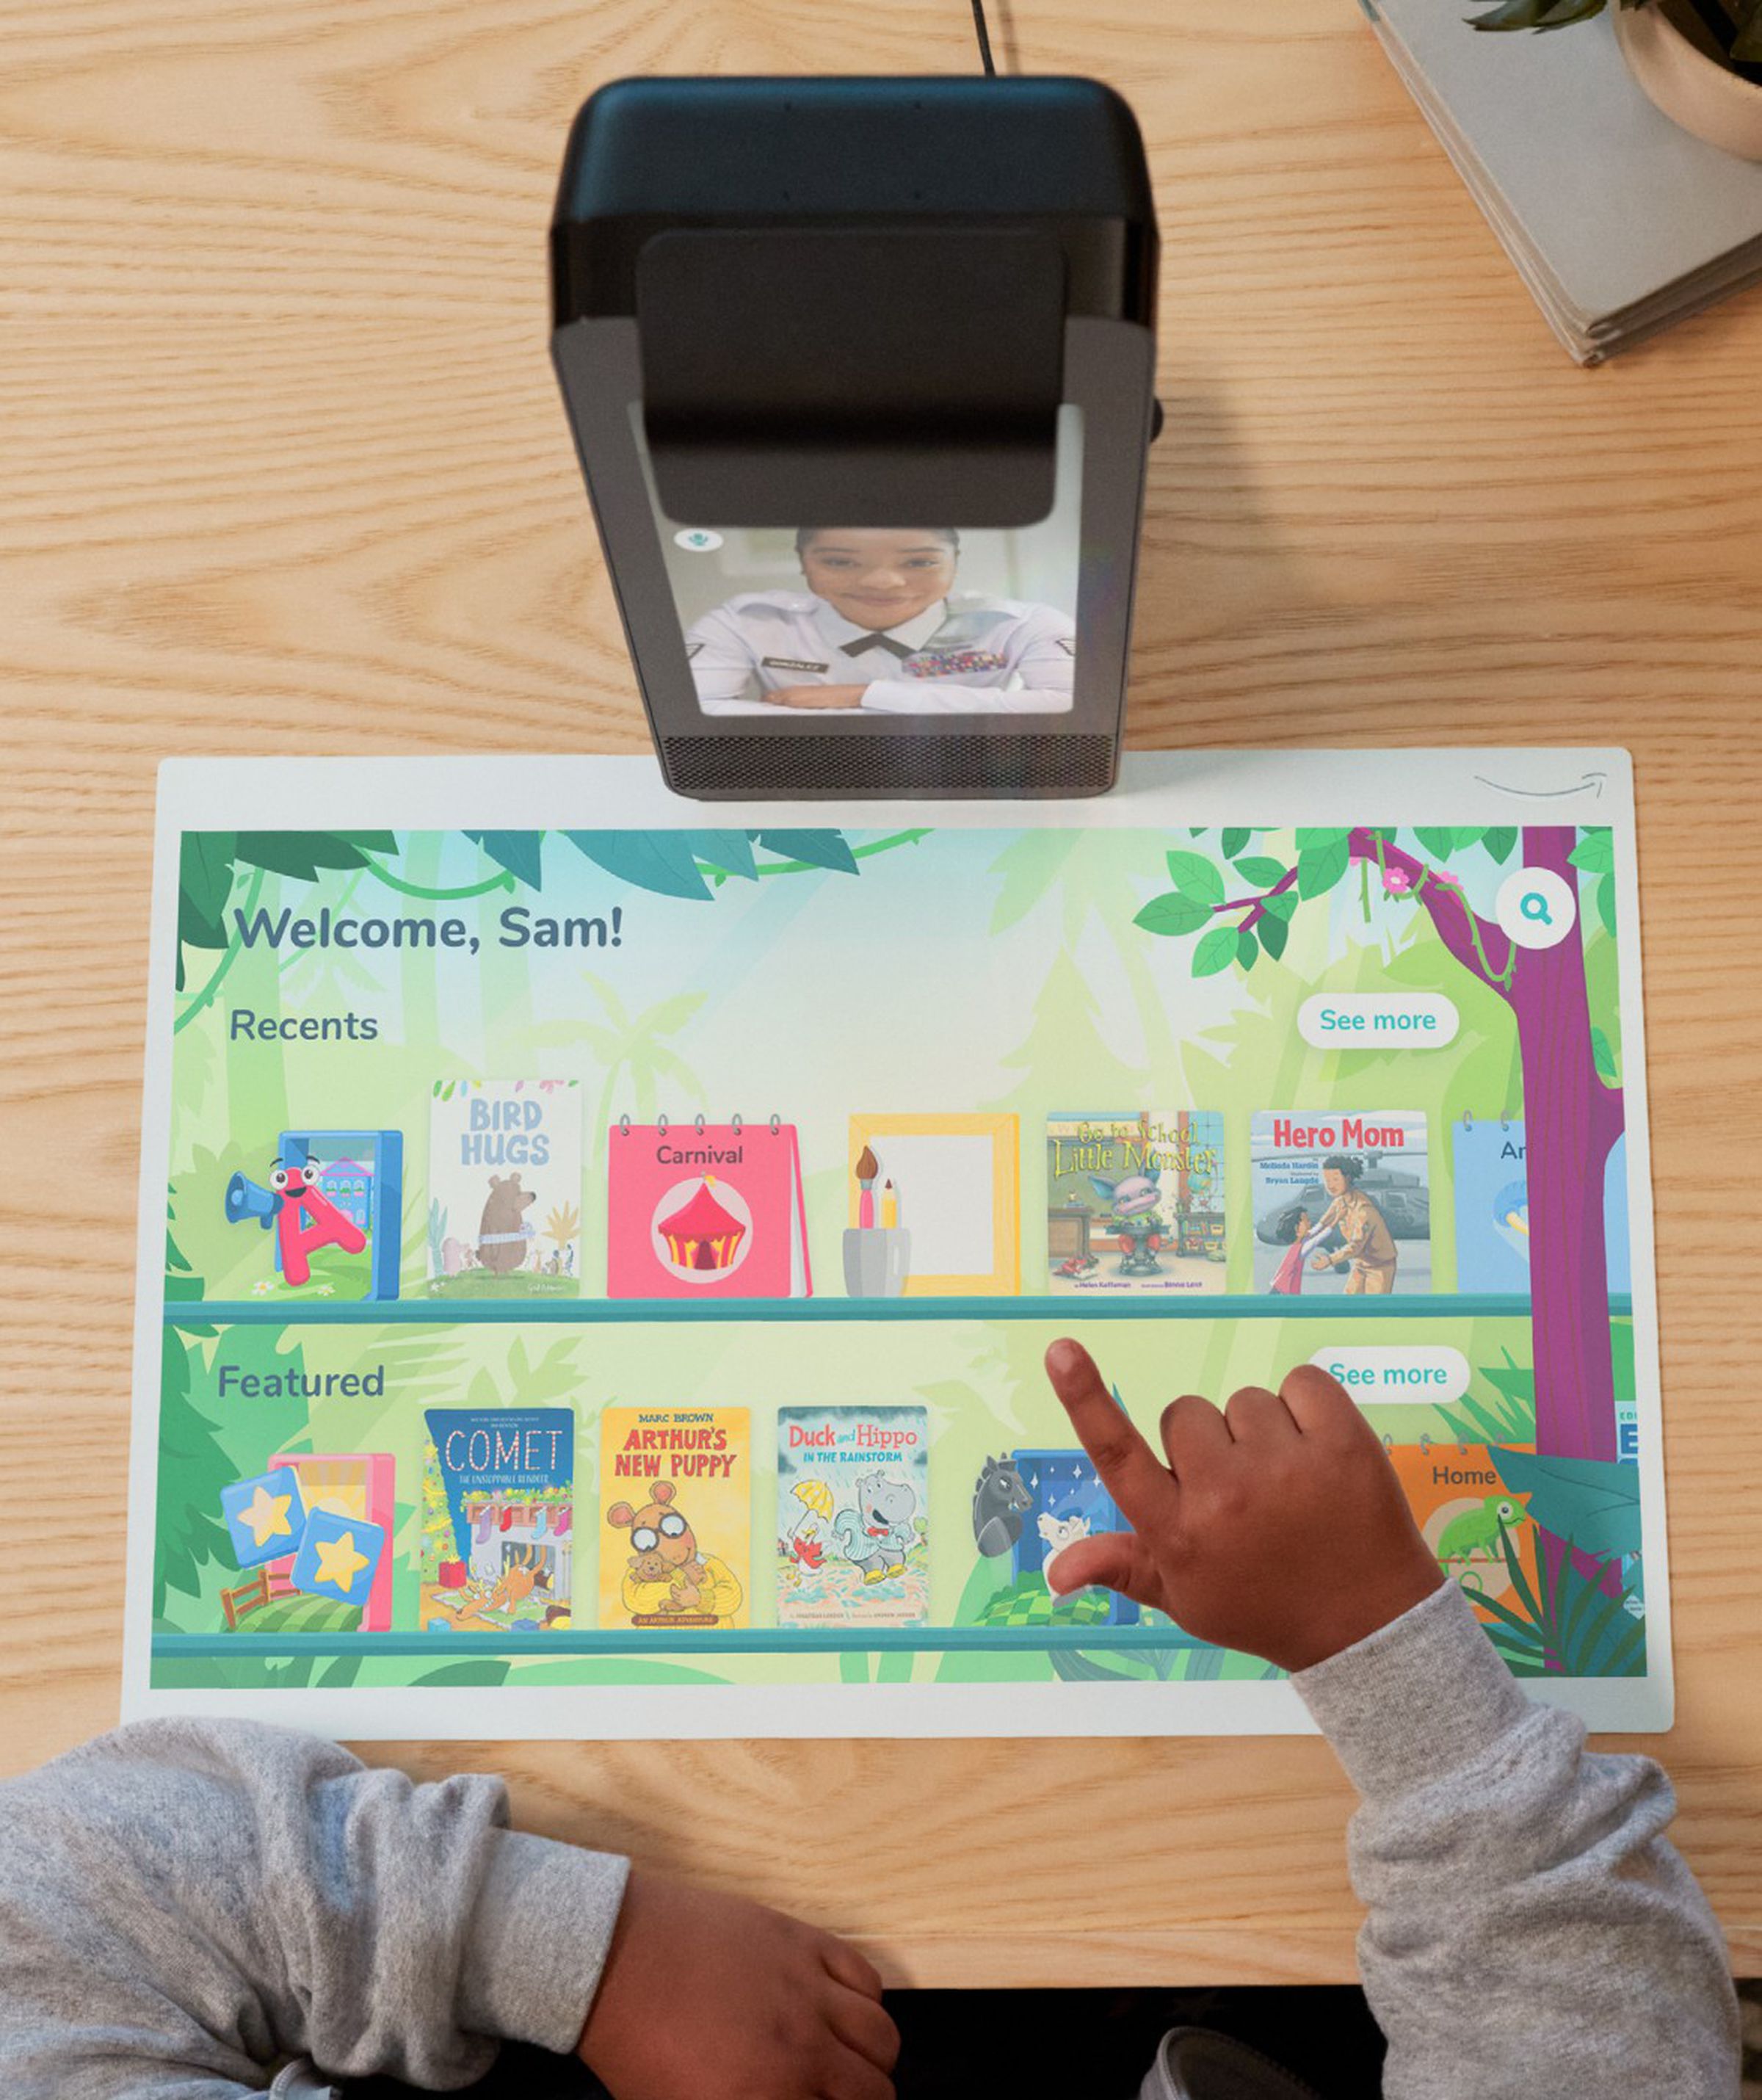 The bundled Amazon Kids Plus subscription comes with a variety of books and other apps, projected onto a 19-inch virtual screen.